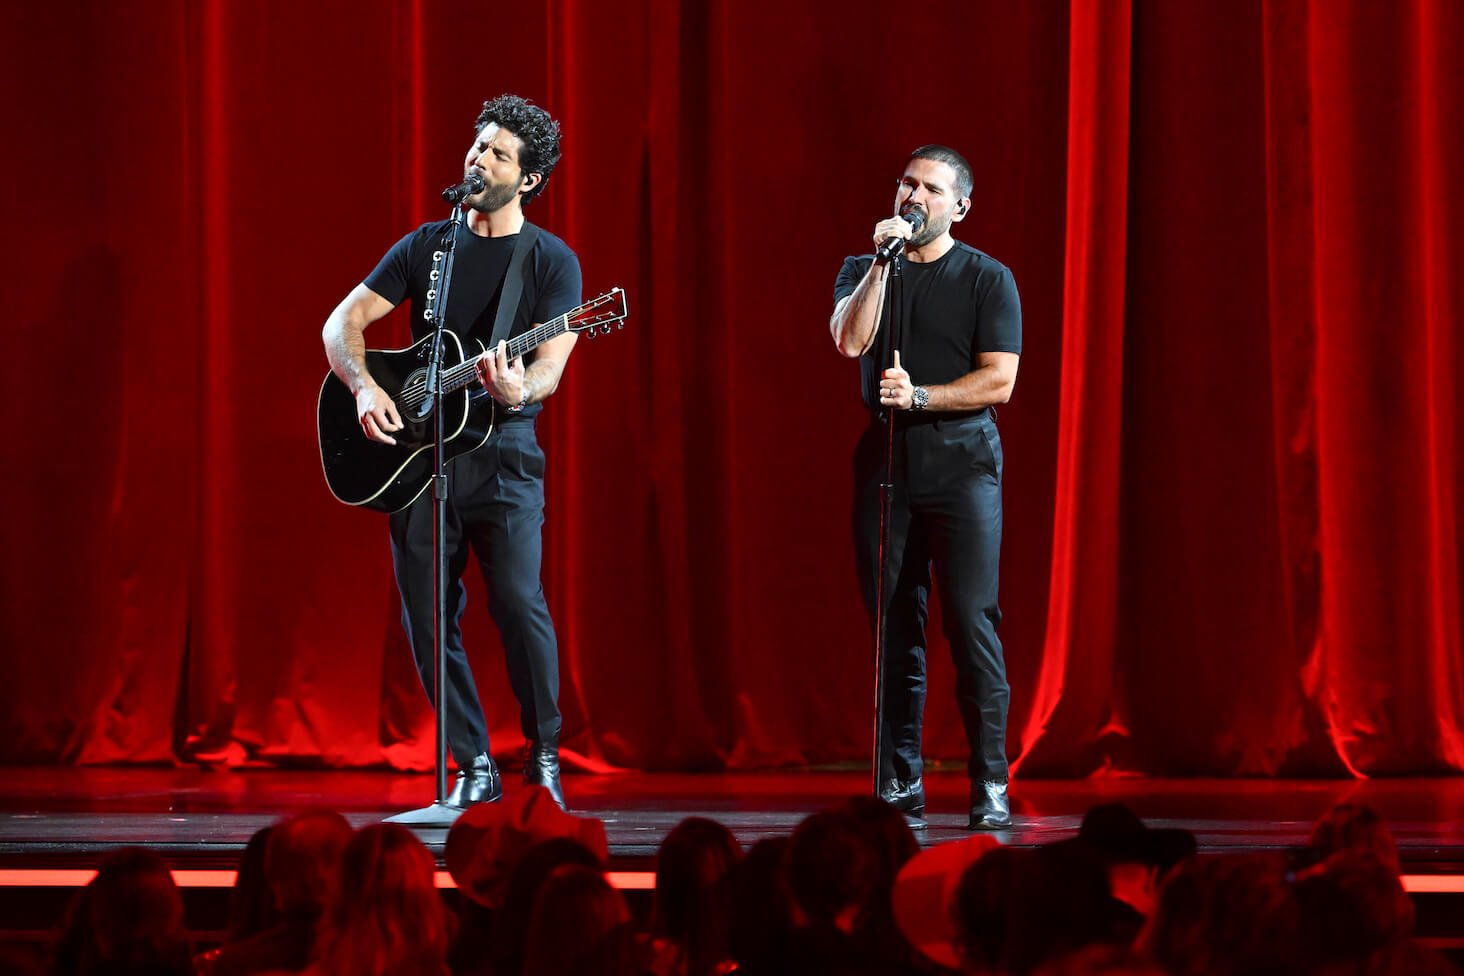 Dan Smyers and Shay Mooney of Dan + Shay singing and performing on stage